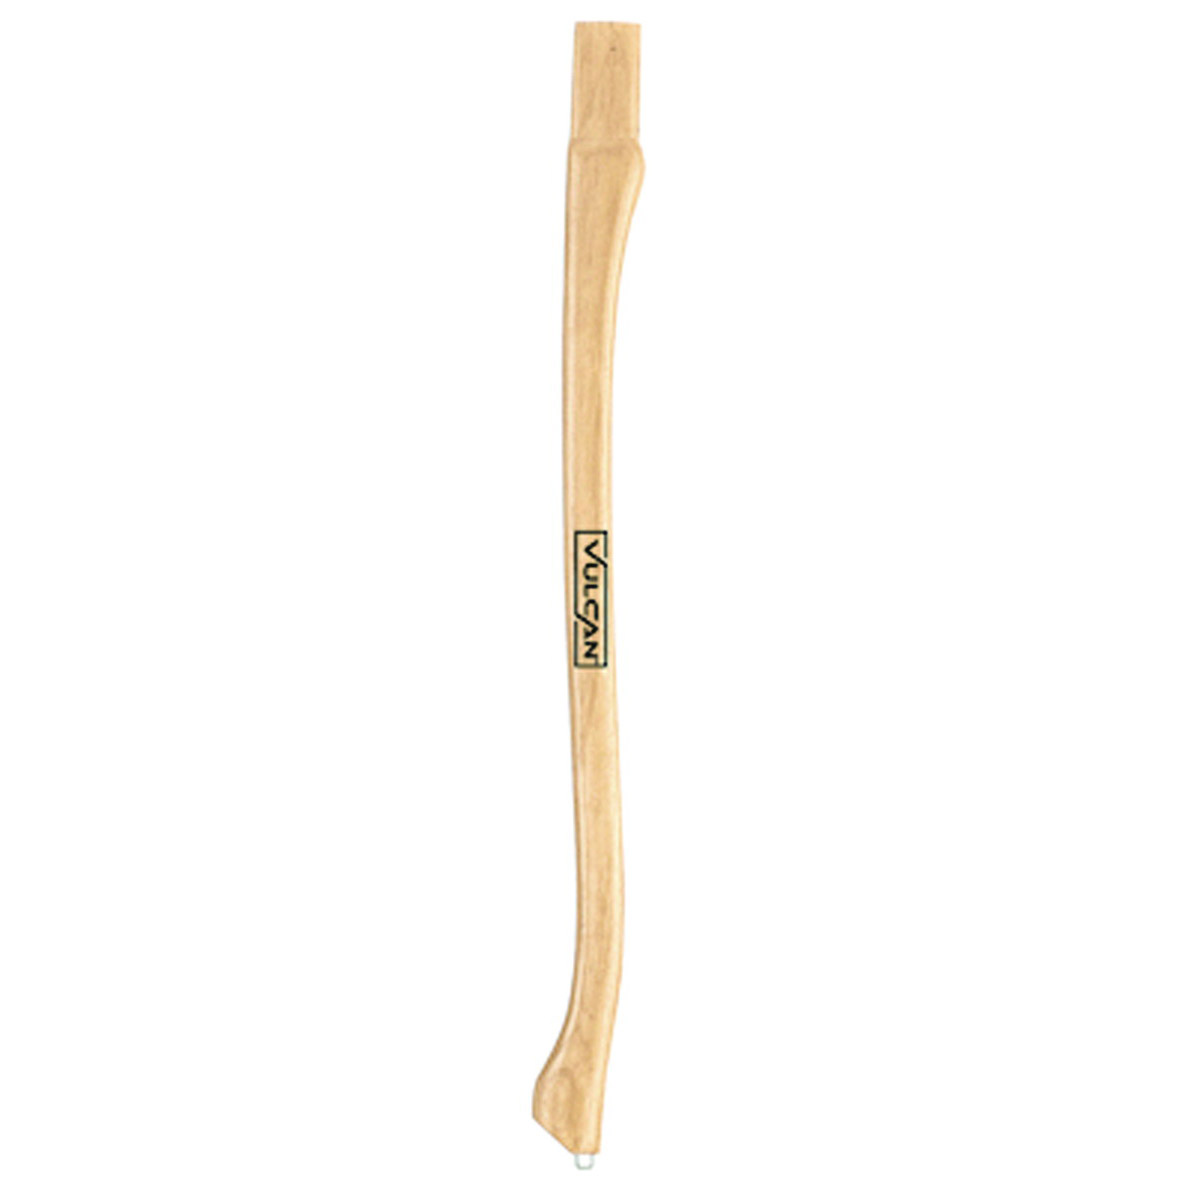 34488 Axe Handle, 36 in L, Hickory Wood, For: Replacement Handle for SKU # 237-9188